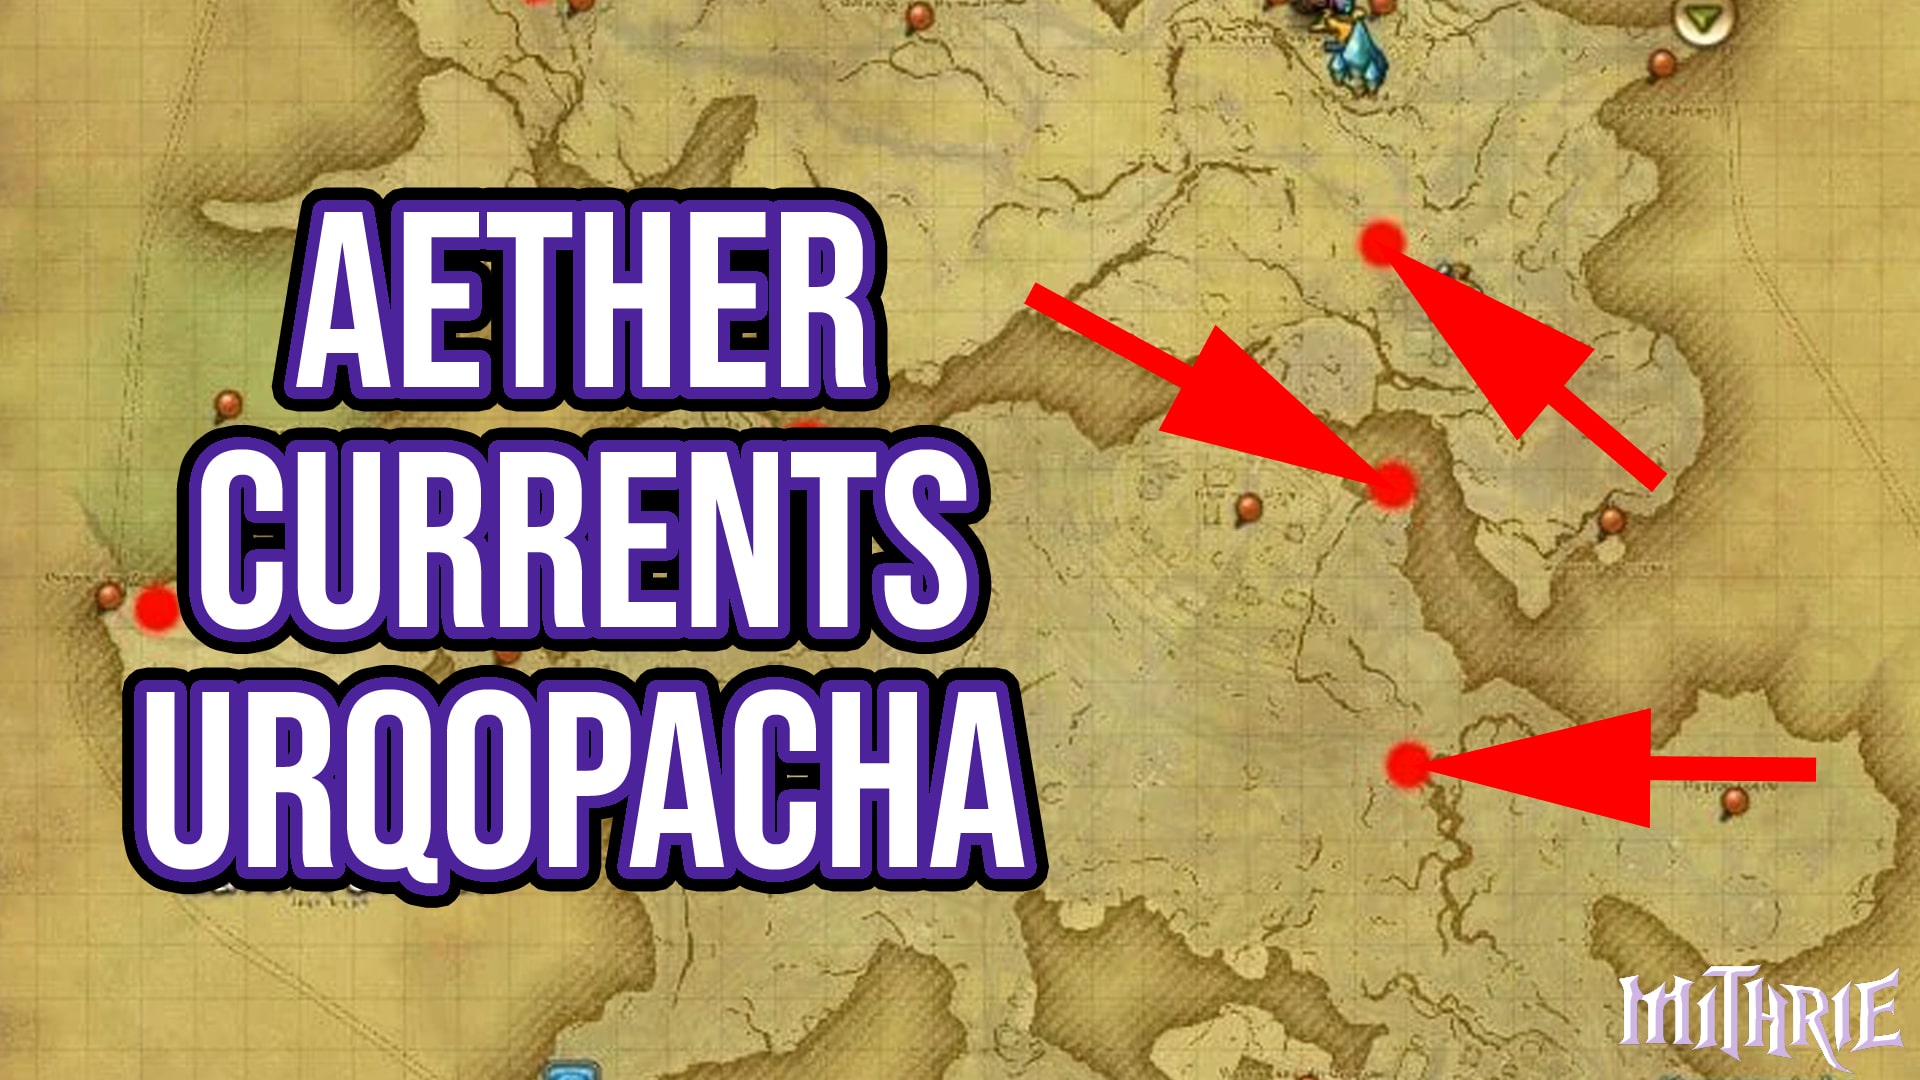 Aether Currents: Urqopacha